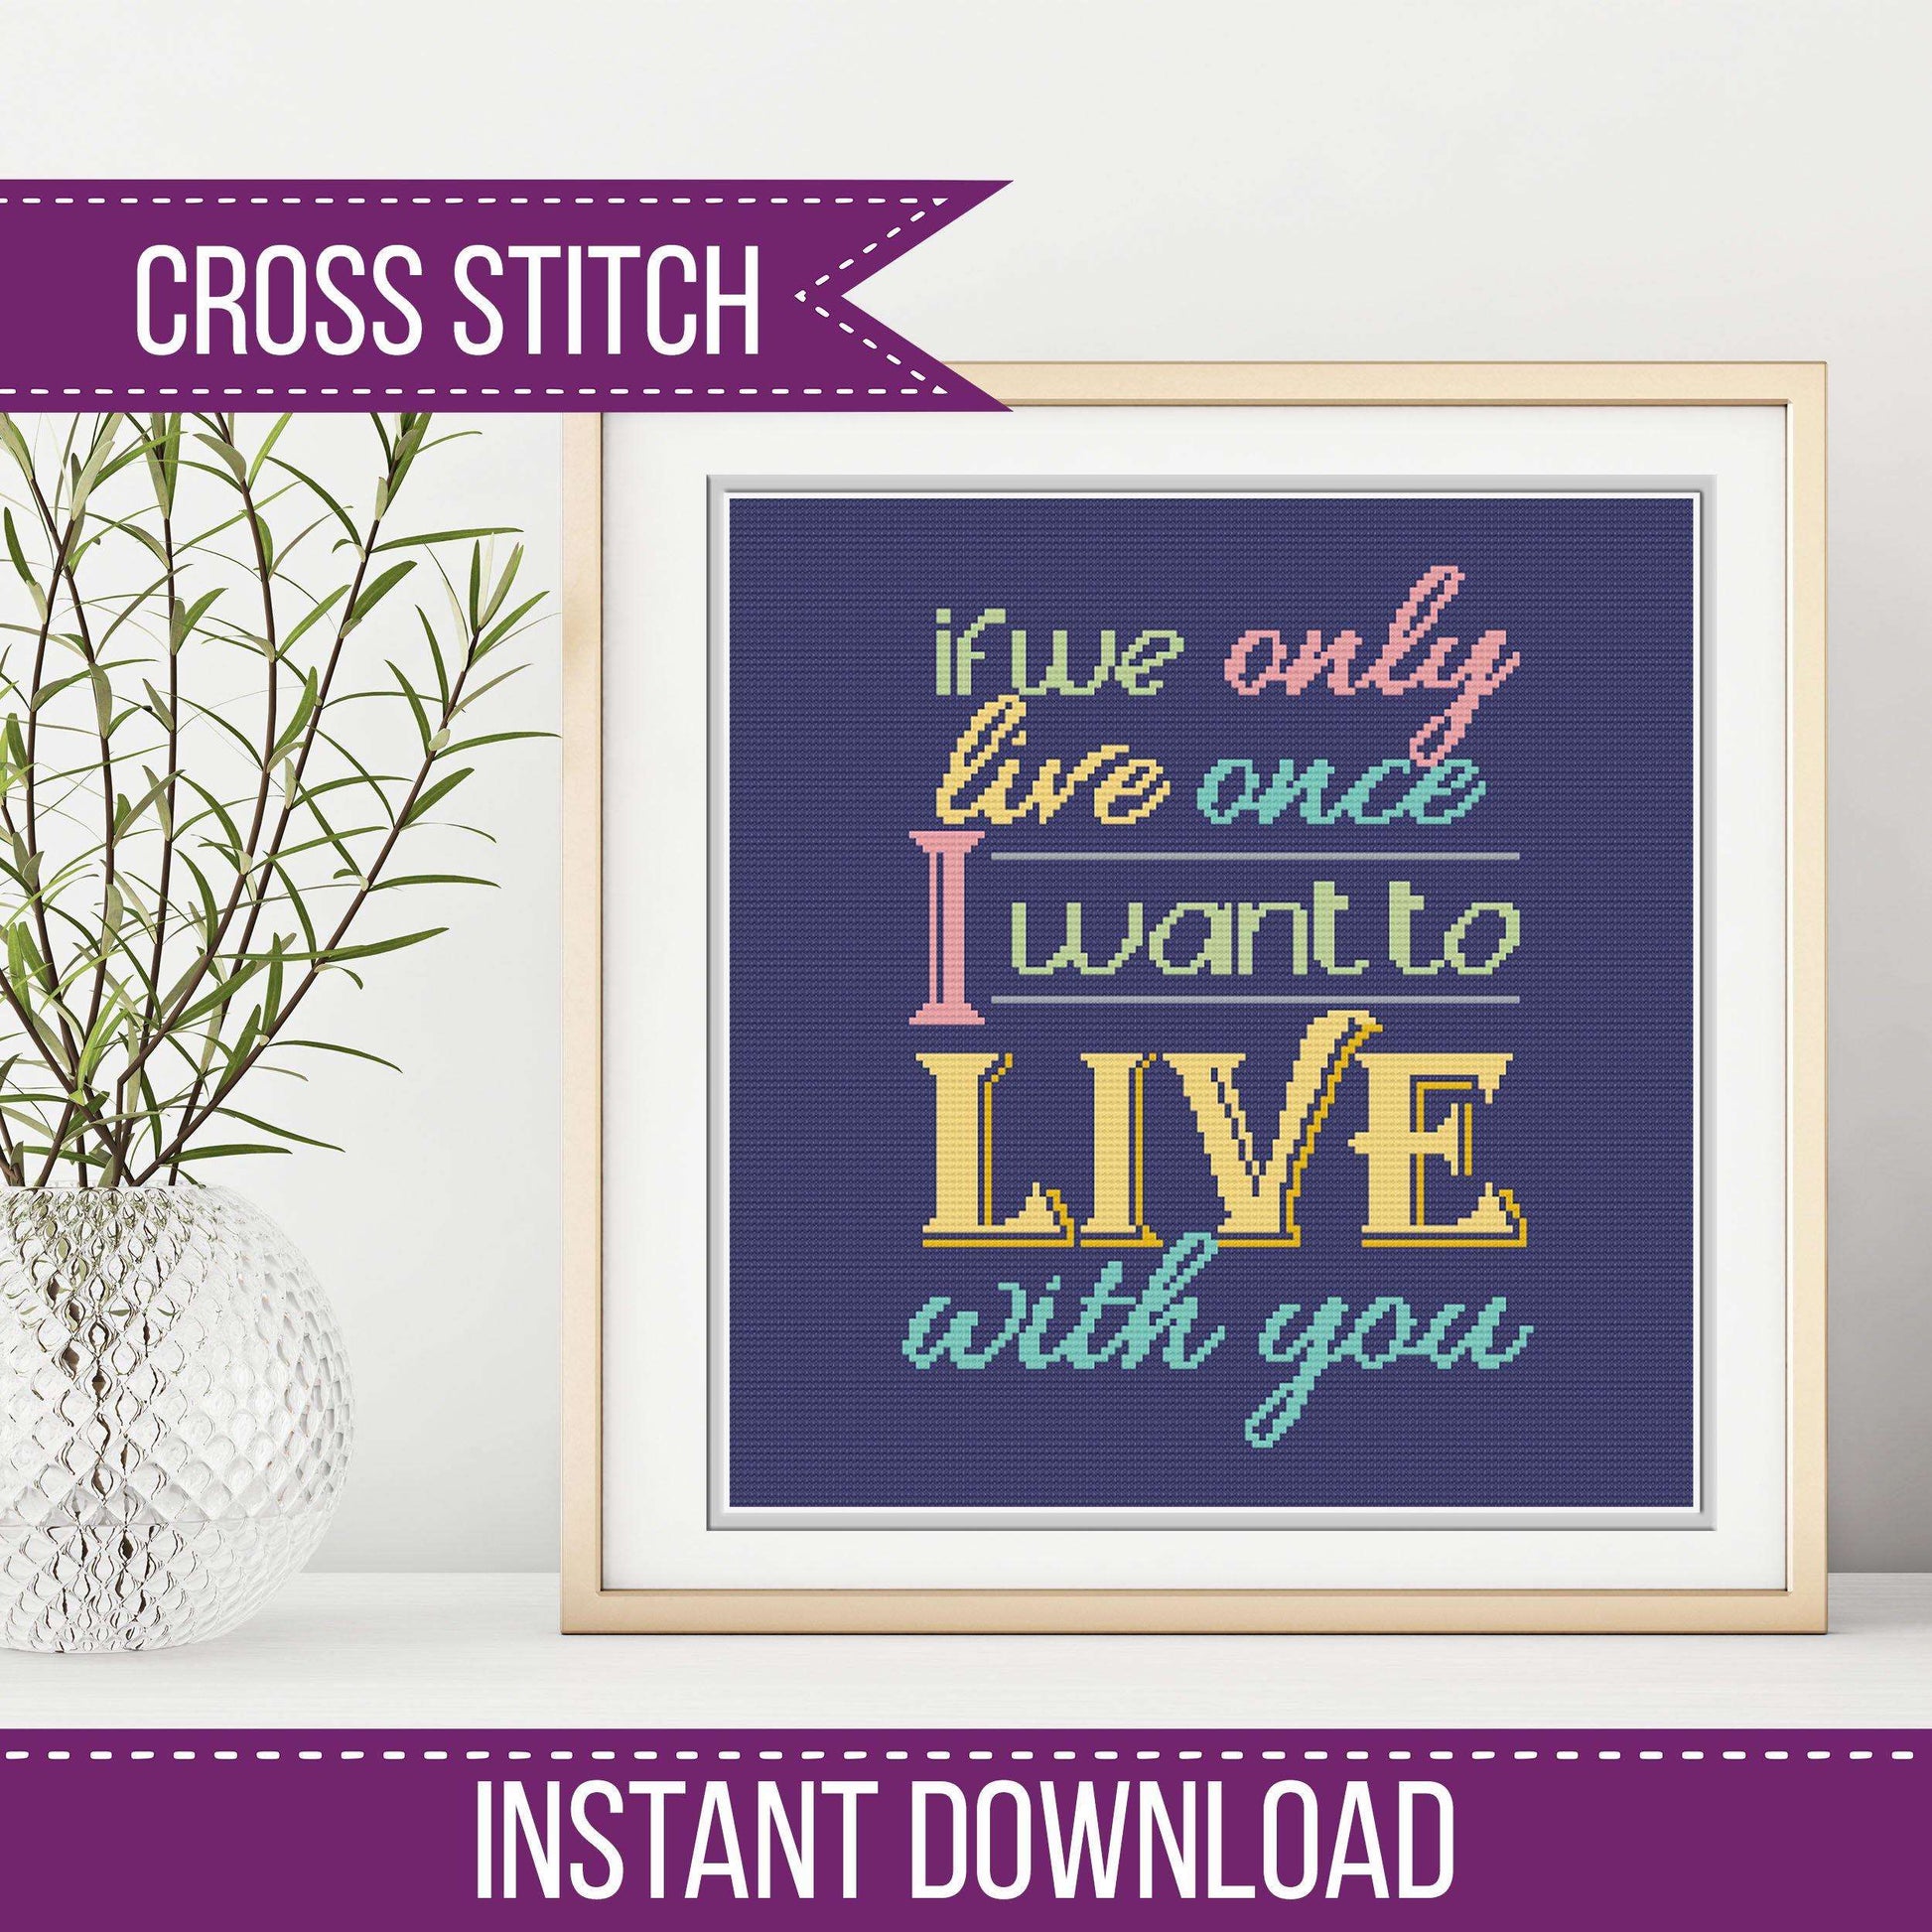 If we Only live once - Blackwork Patterns & Cross Stitch by Peppermint Purple